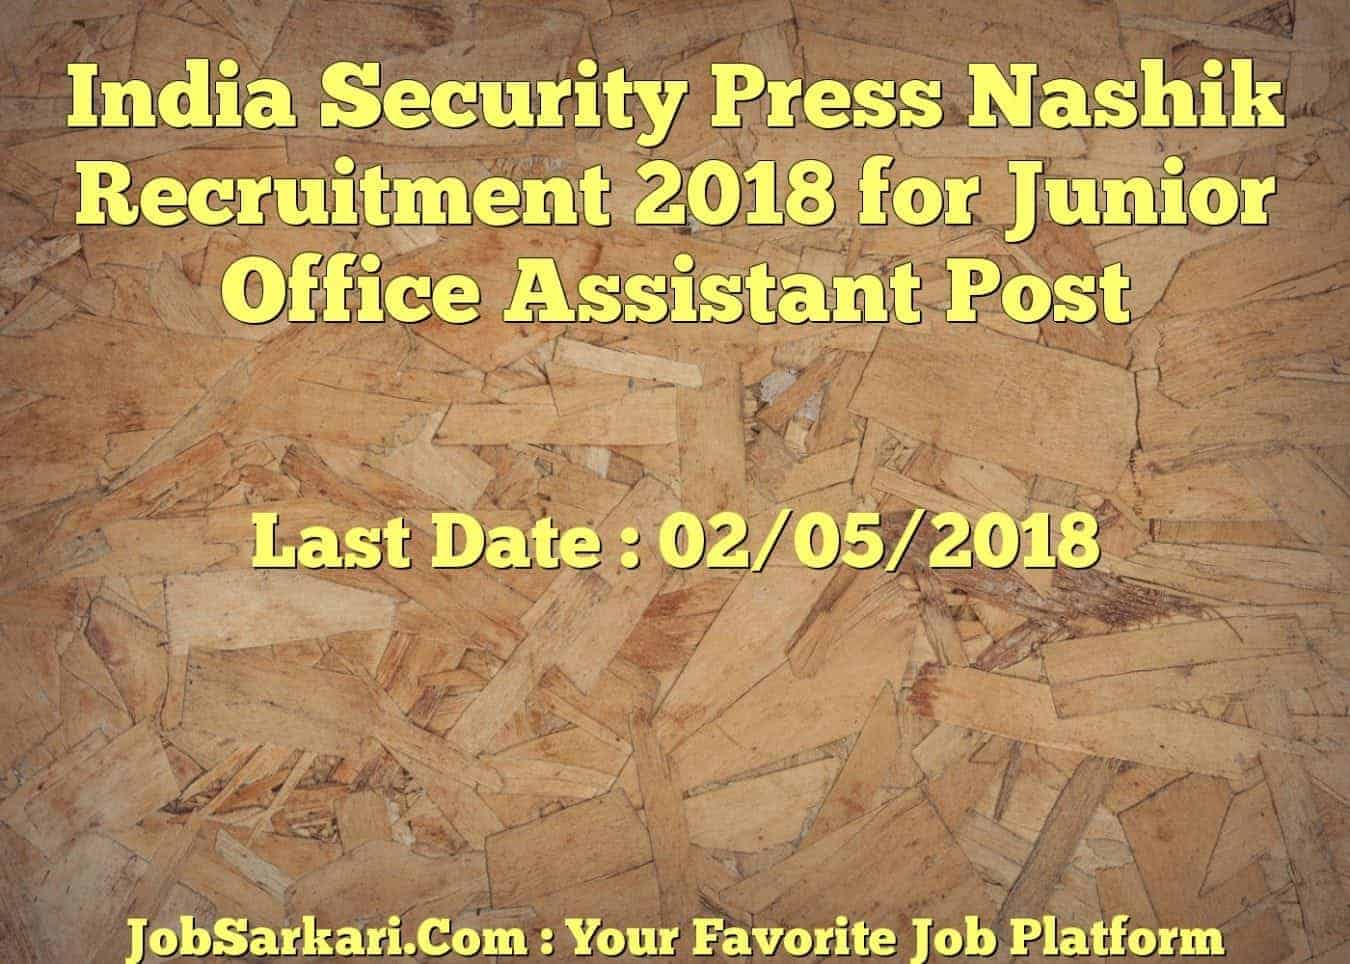 India Security Press Nashik Recruitment 2018 for Junior Office Assistant Post